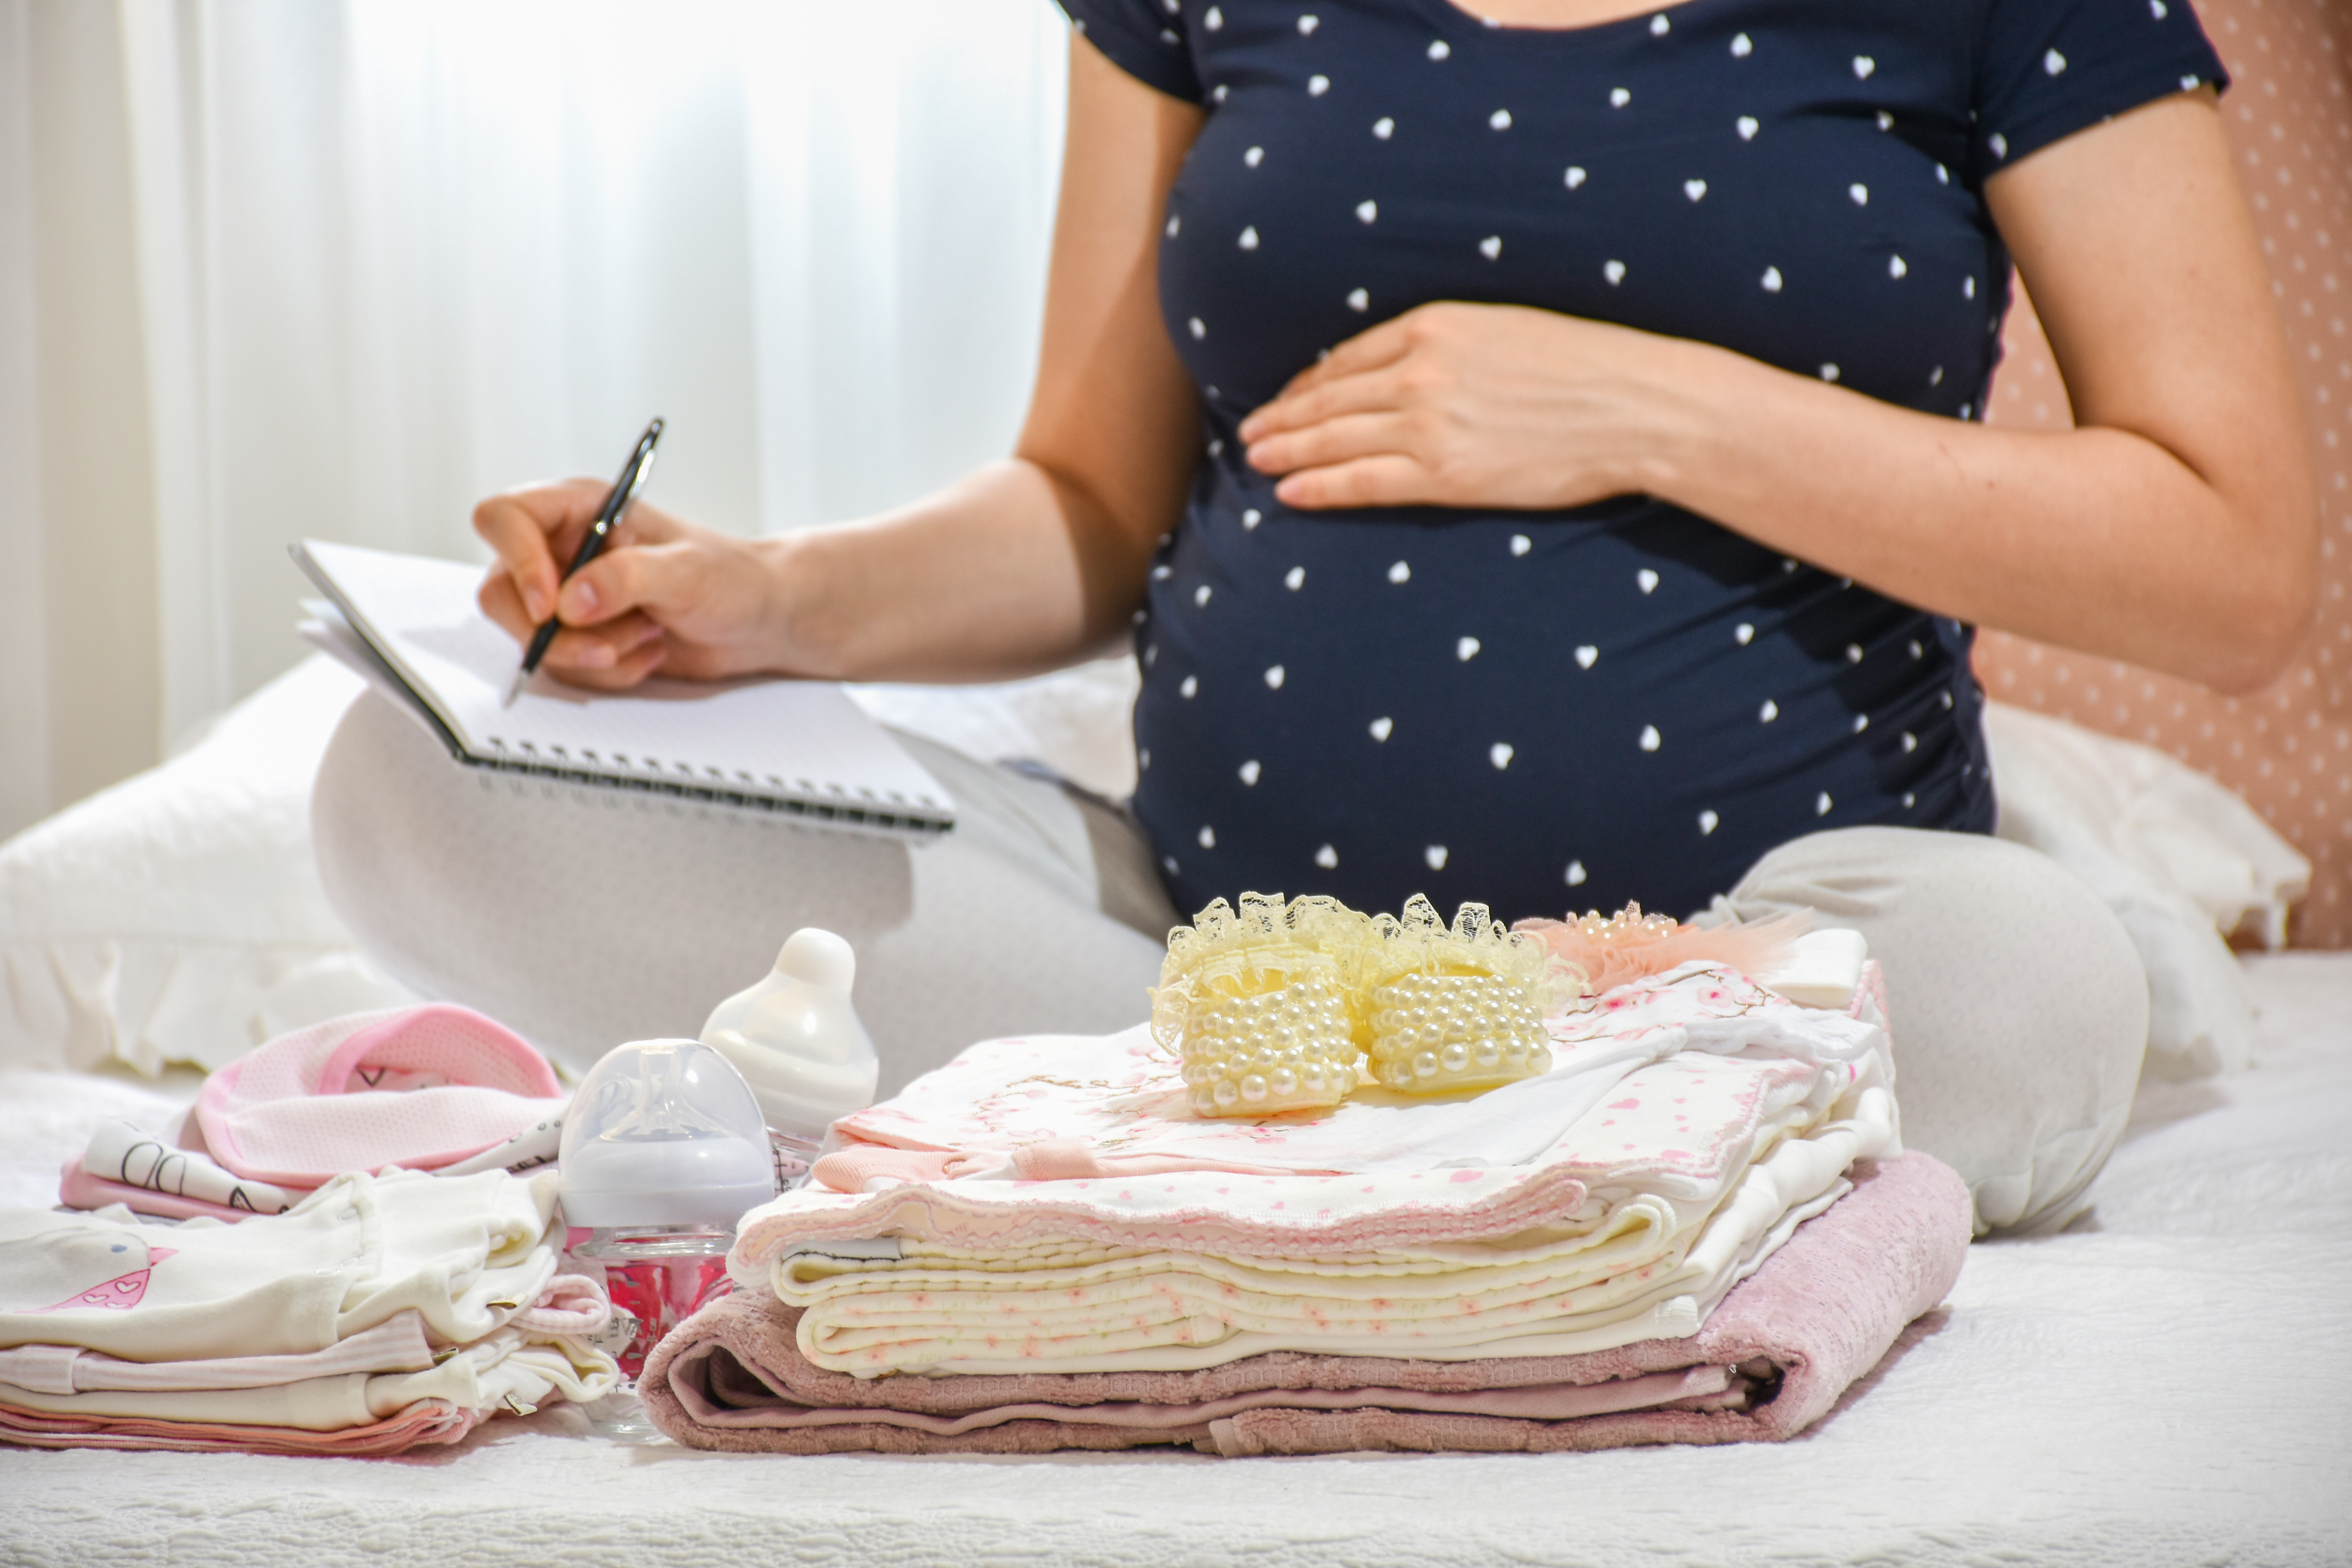 A pregnant woman with baby clothes | Source: Shutterstock